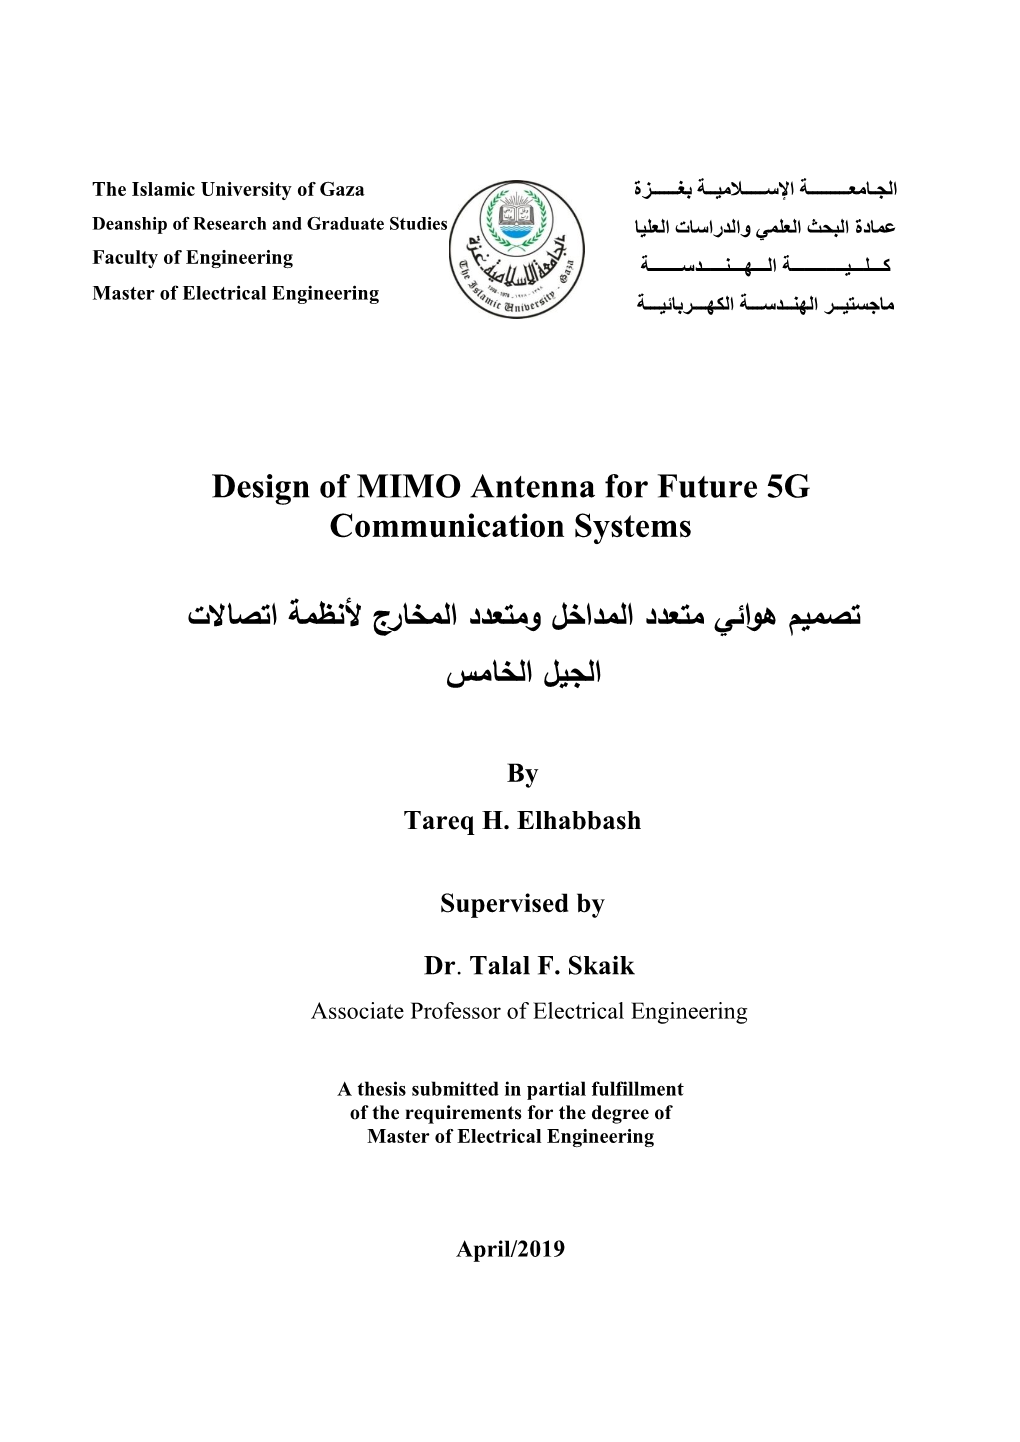 Design of MIMO Antenna for Future 5G Communication Systems تصميم